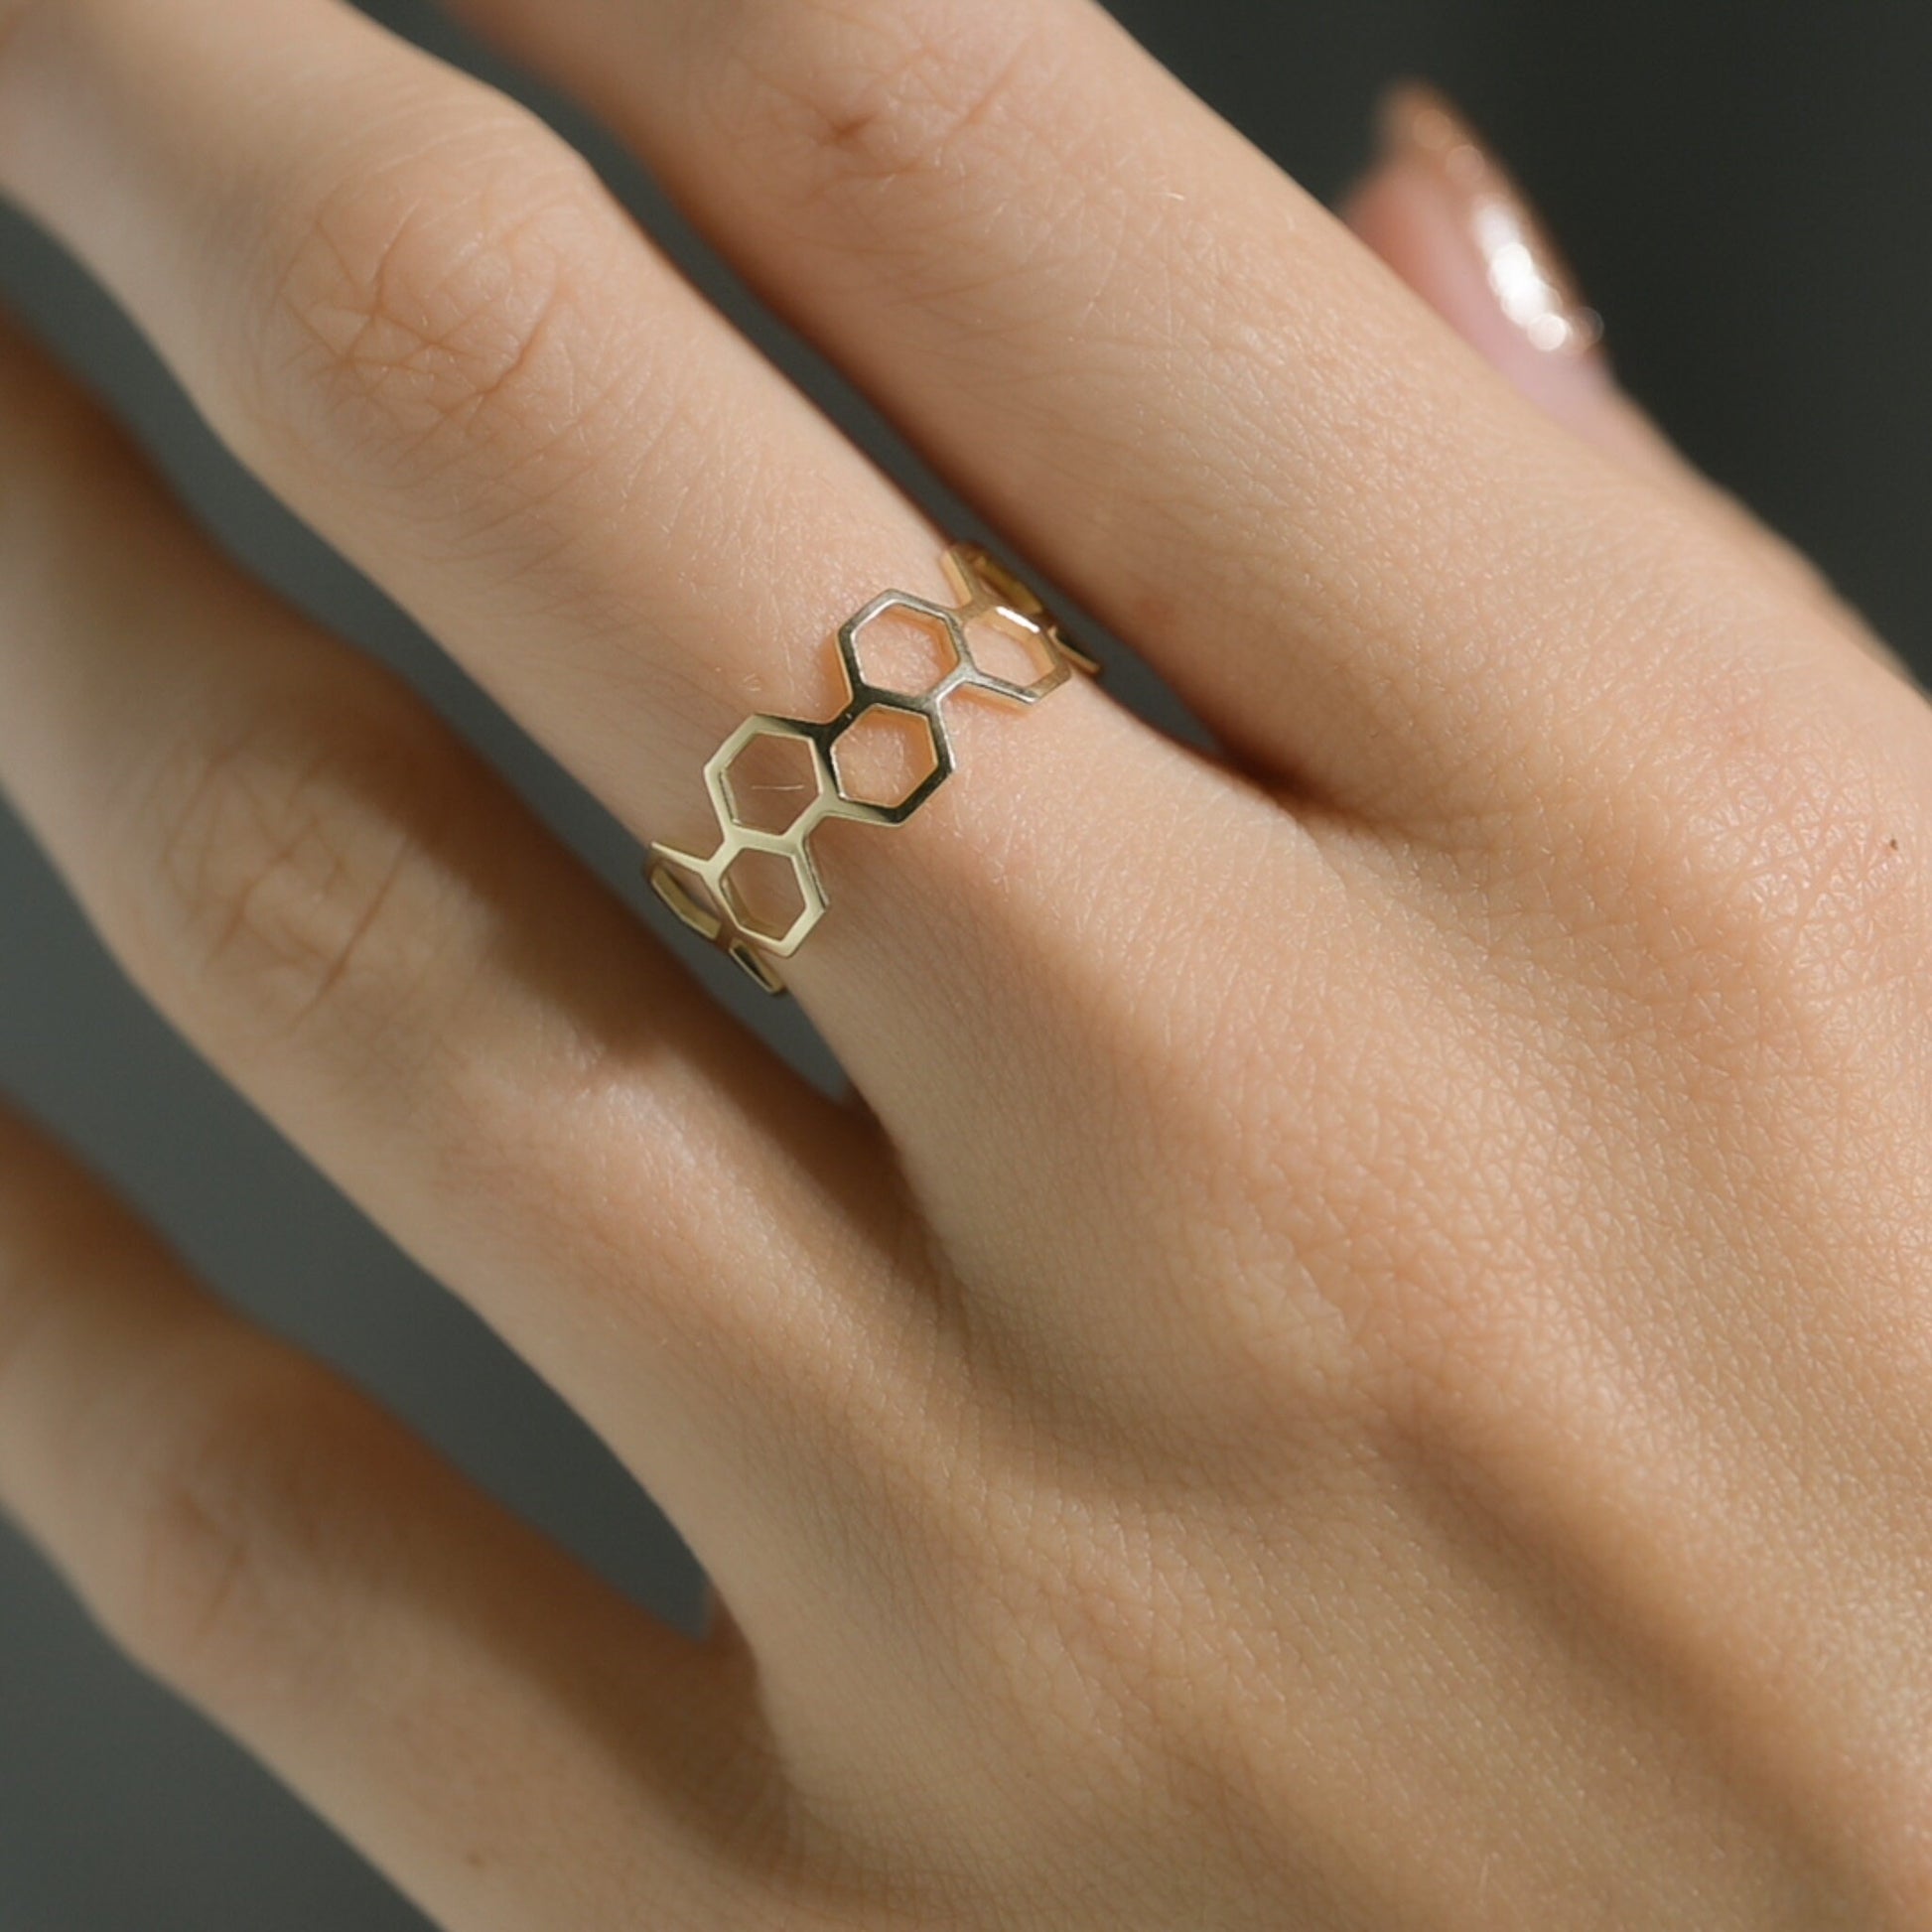 Honey Comb Hexagon Ring in Solid Gold, Solid Silver, Vermeil, and 14K Gold Plate